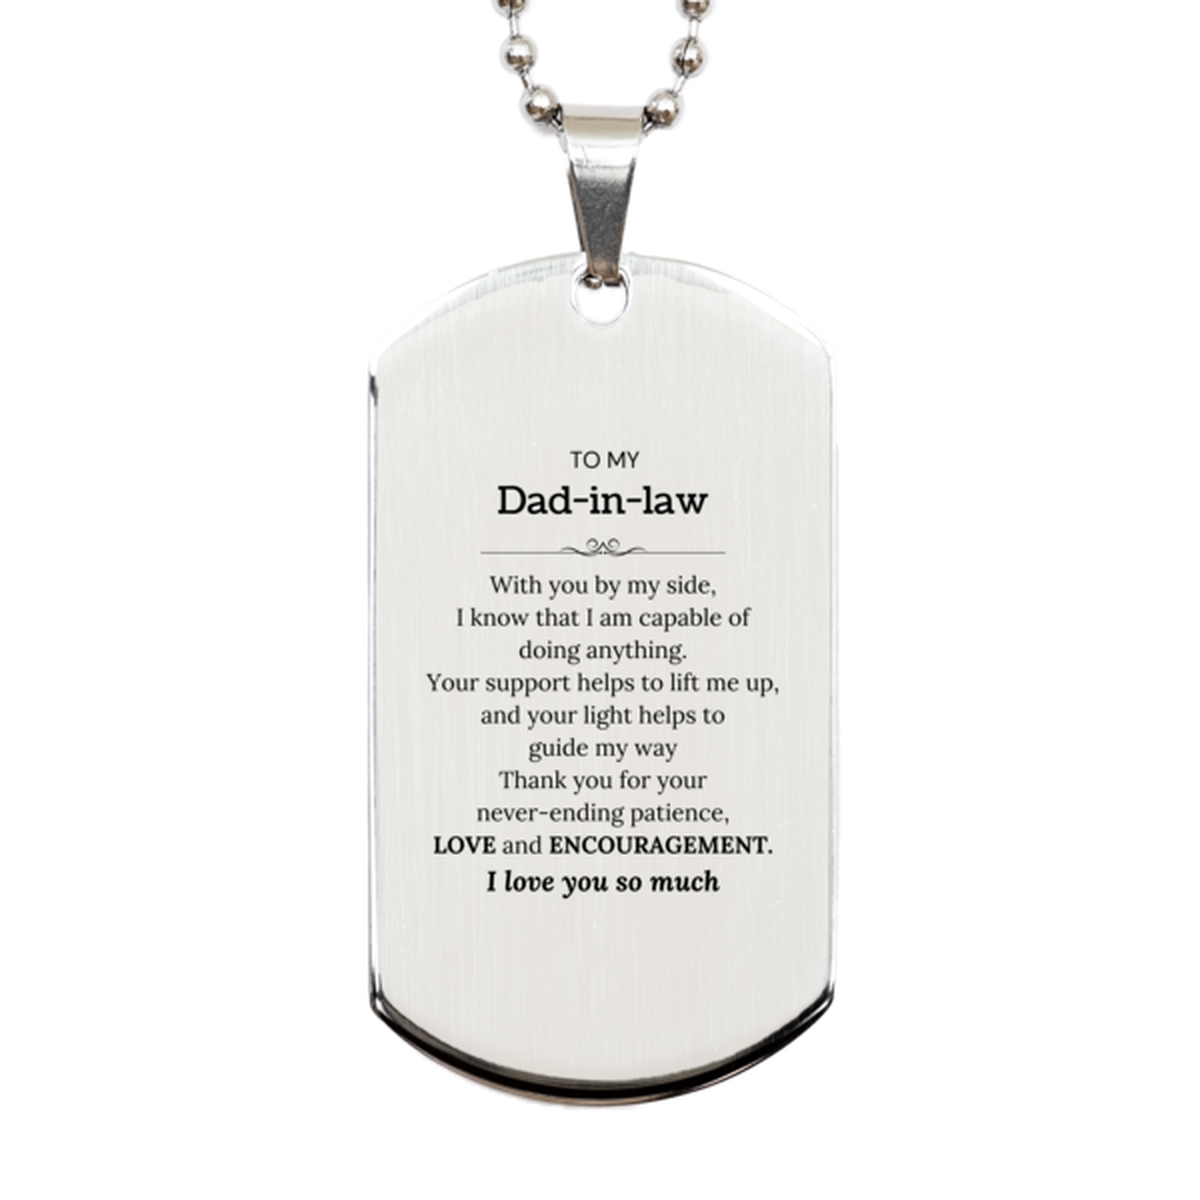 Appreciation Dad-in-law Silver Dog Tag Gifts, To My Dad-in-law Birthday Christmas Wedding Keepsake Gifts for Dad-in-law With you by my side, I know that I am capable of doing anything. I love you so much